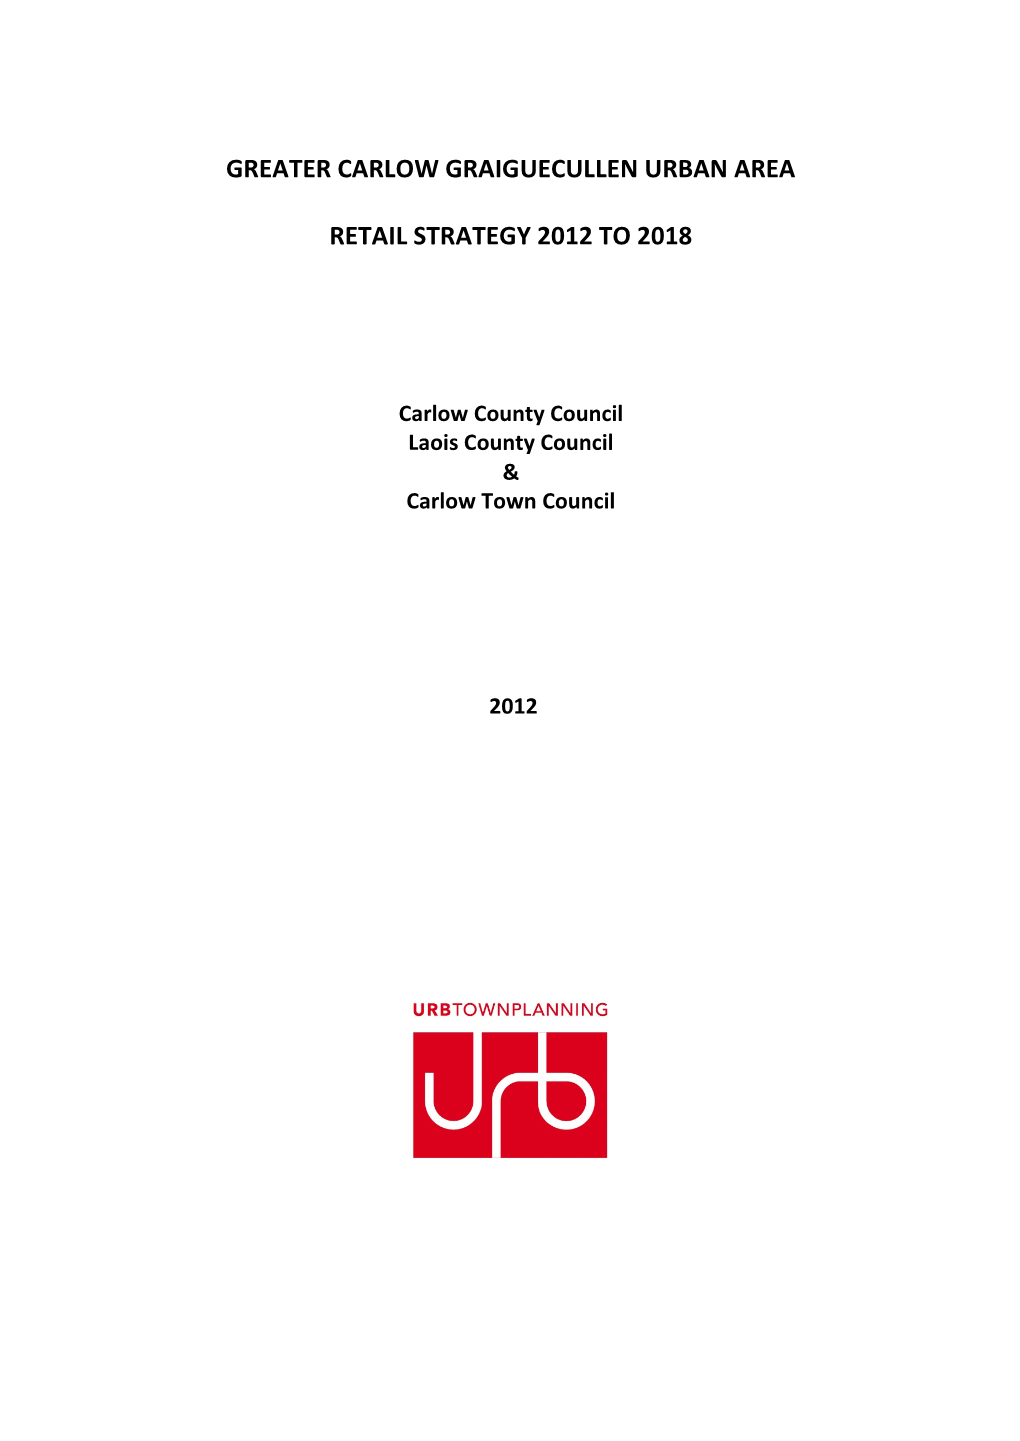 Greater Carlow Graiguecullen Urban Area Retail Strategy 2012 to 2018